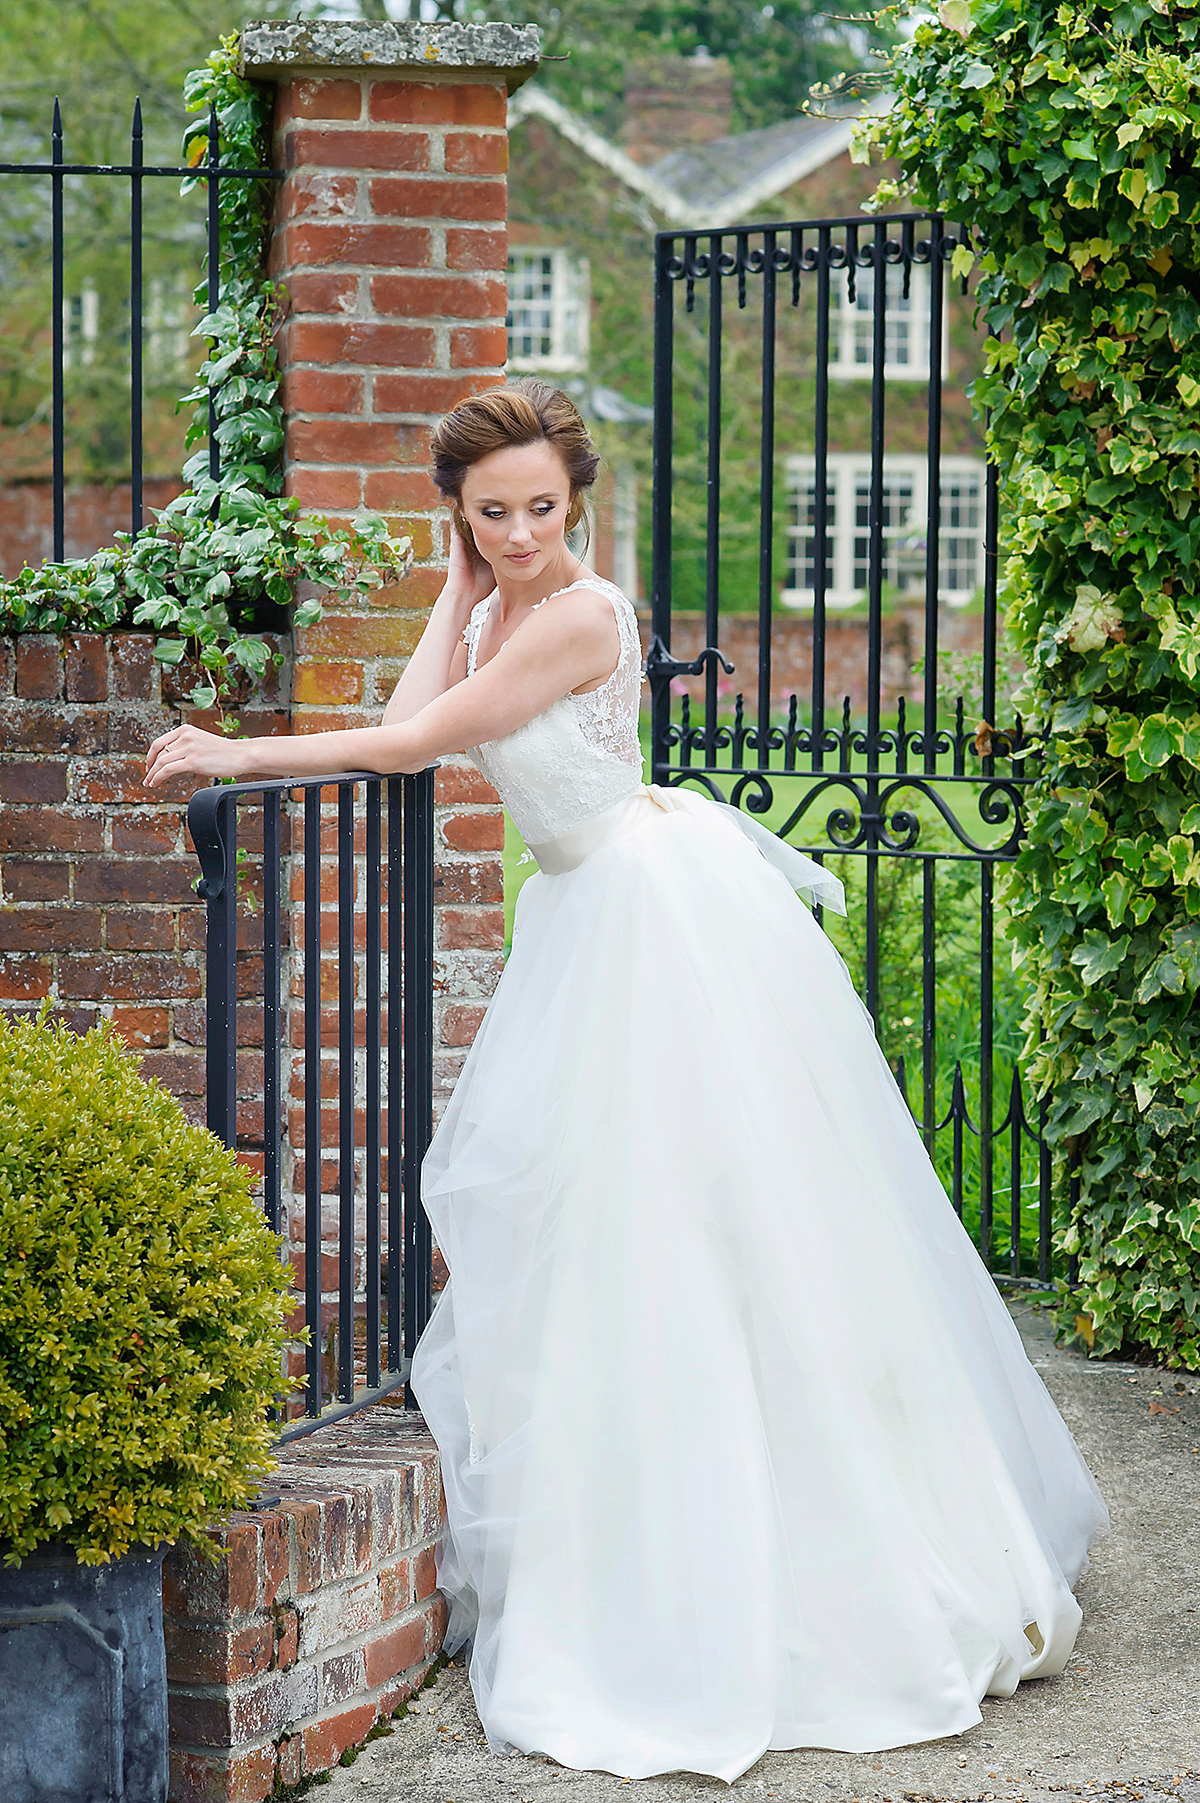 Lara B Bridal Couture allow you to design a wedding dress from bridal separates. Visit www.larab.co.uk for further information.